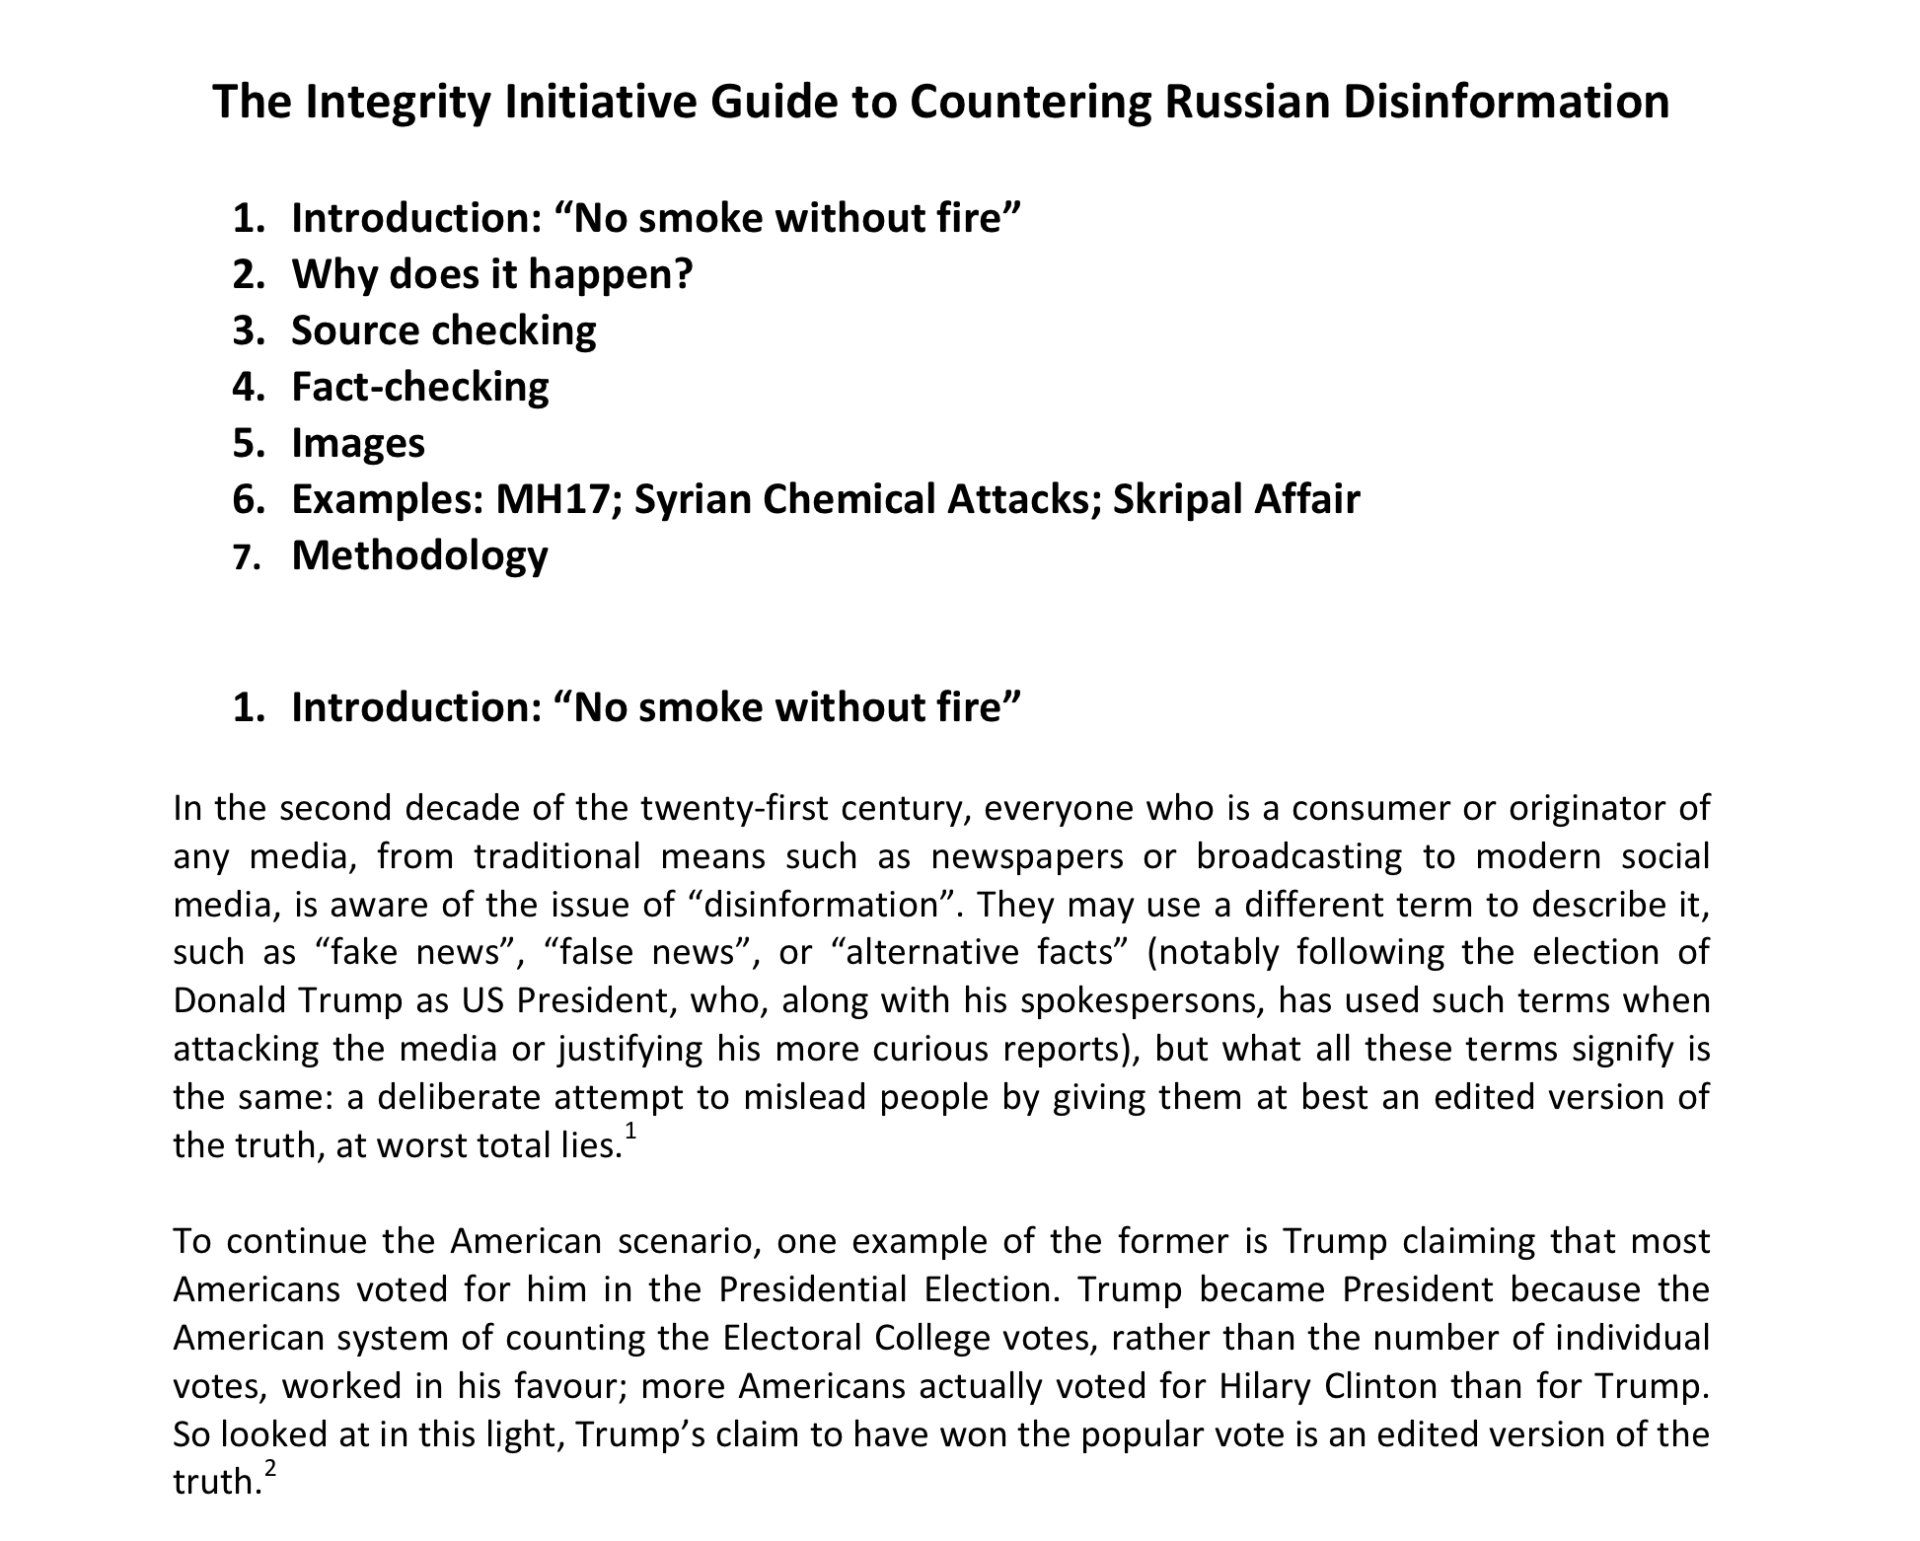 The integrity initiative Guide to Countering Russian Disinformation